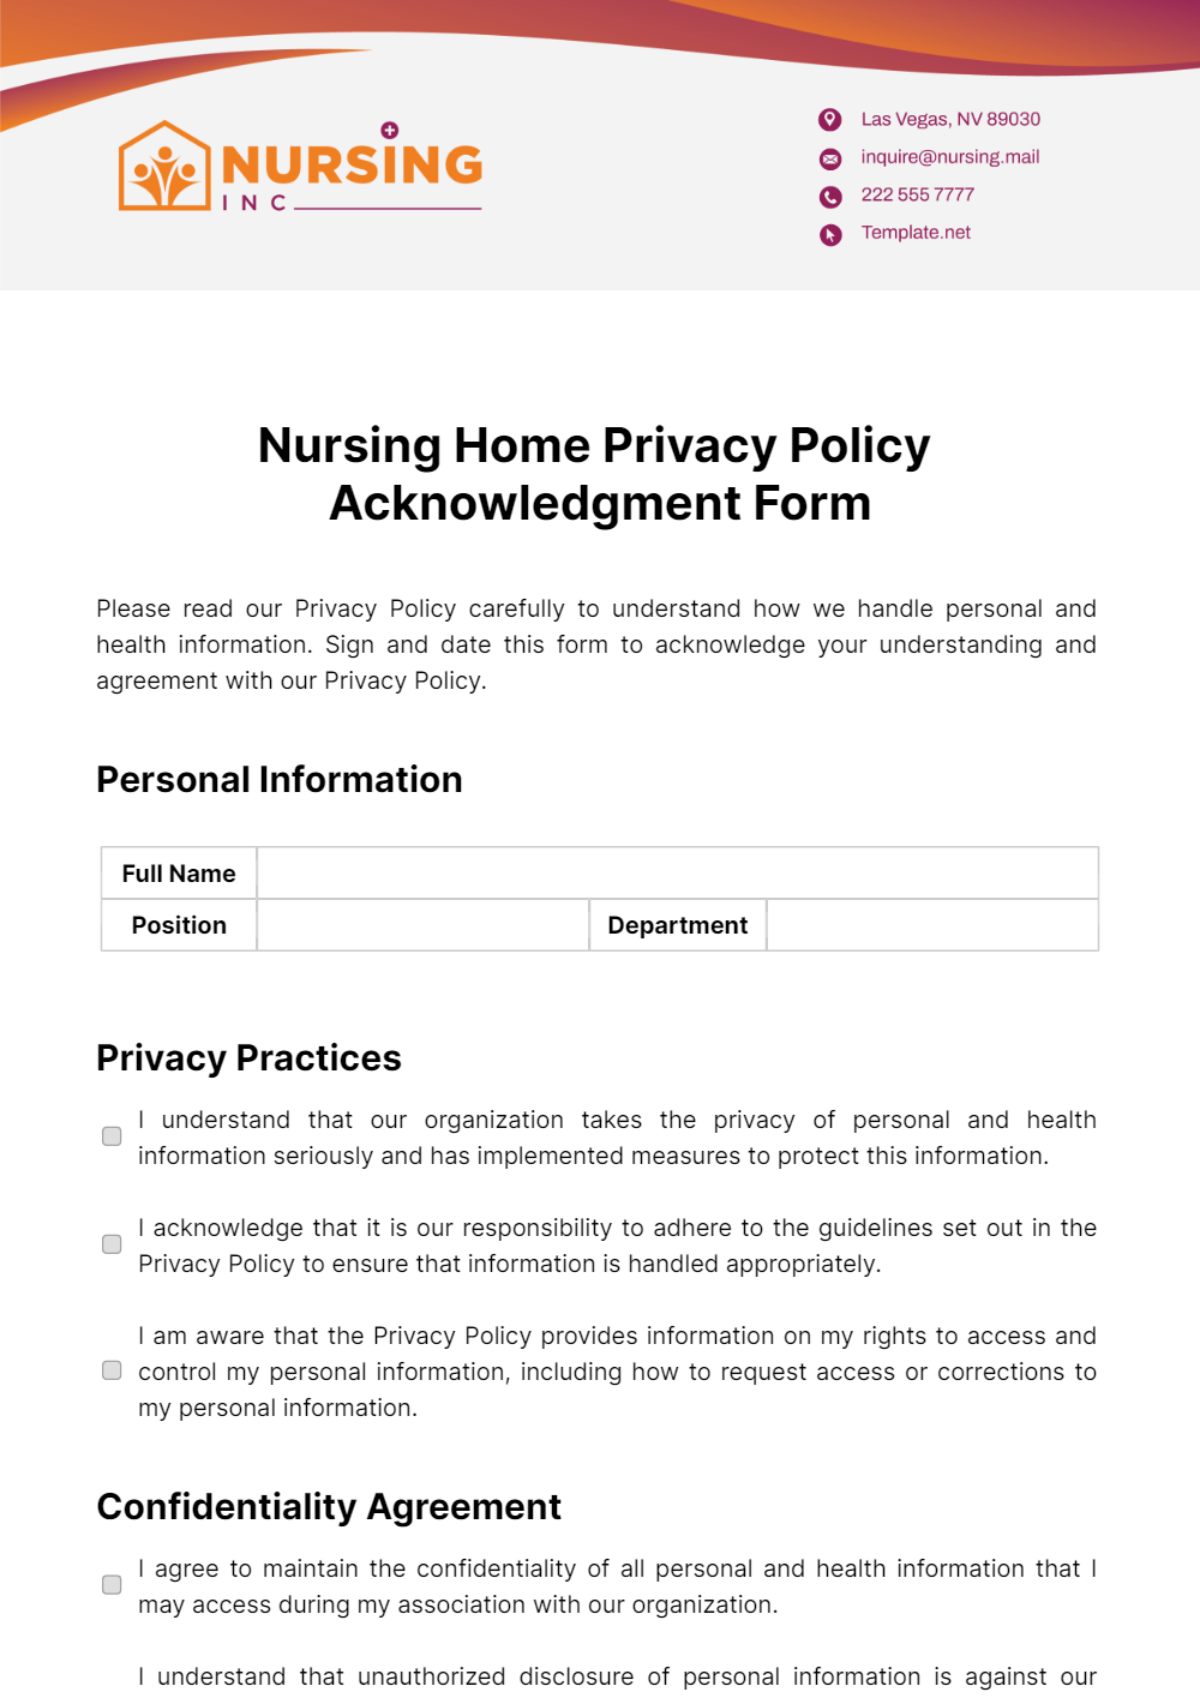 Free Nursing Home Privacy Policy Acknowledgment Form Template